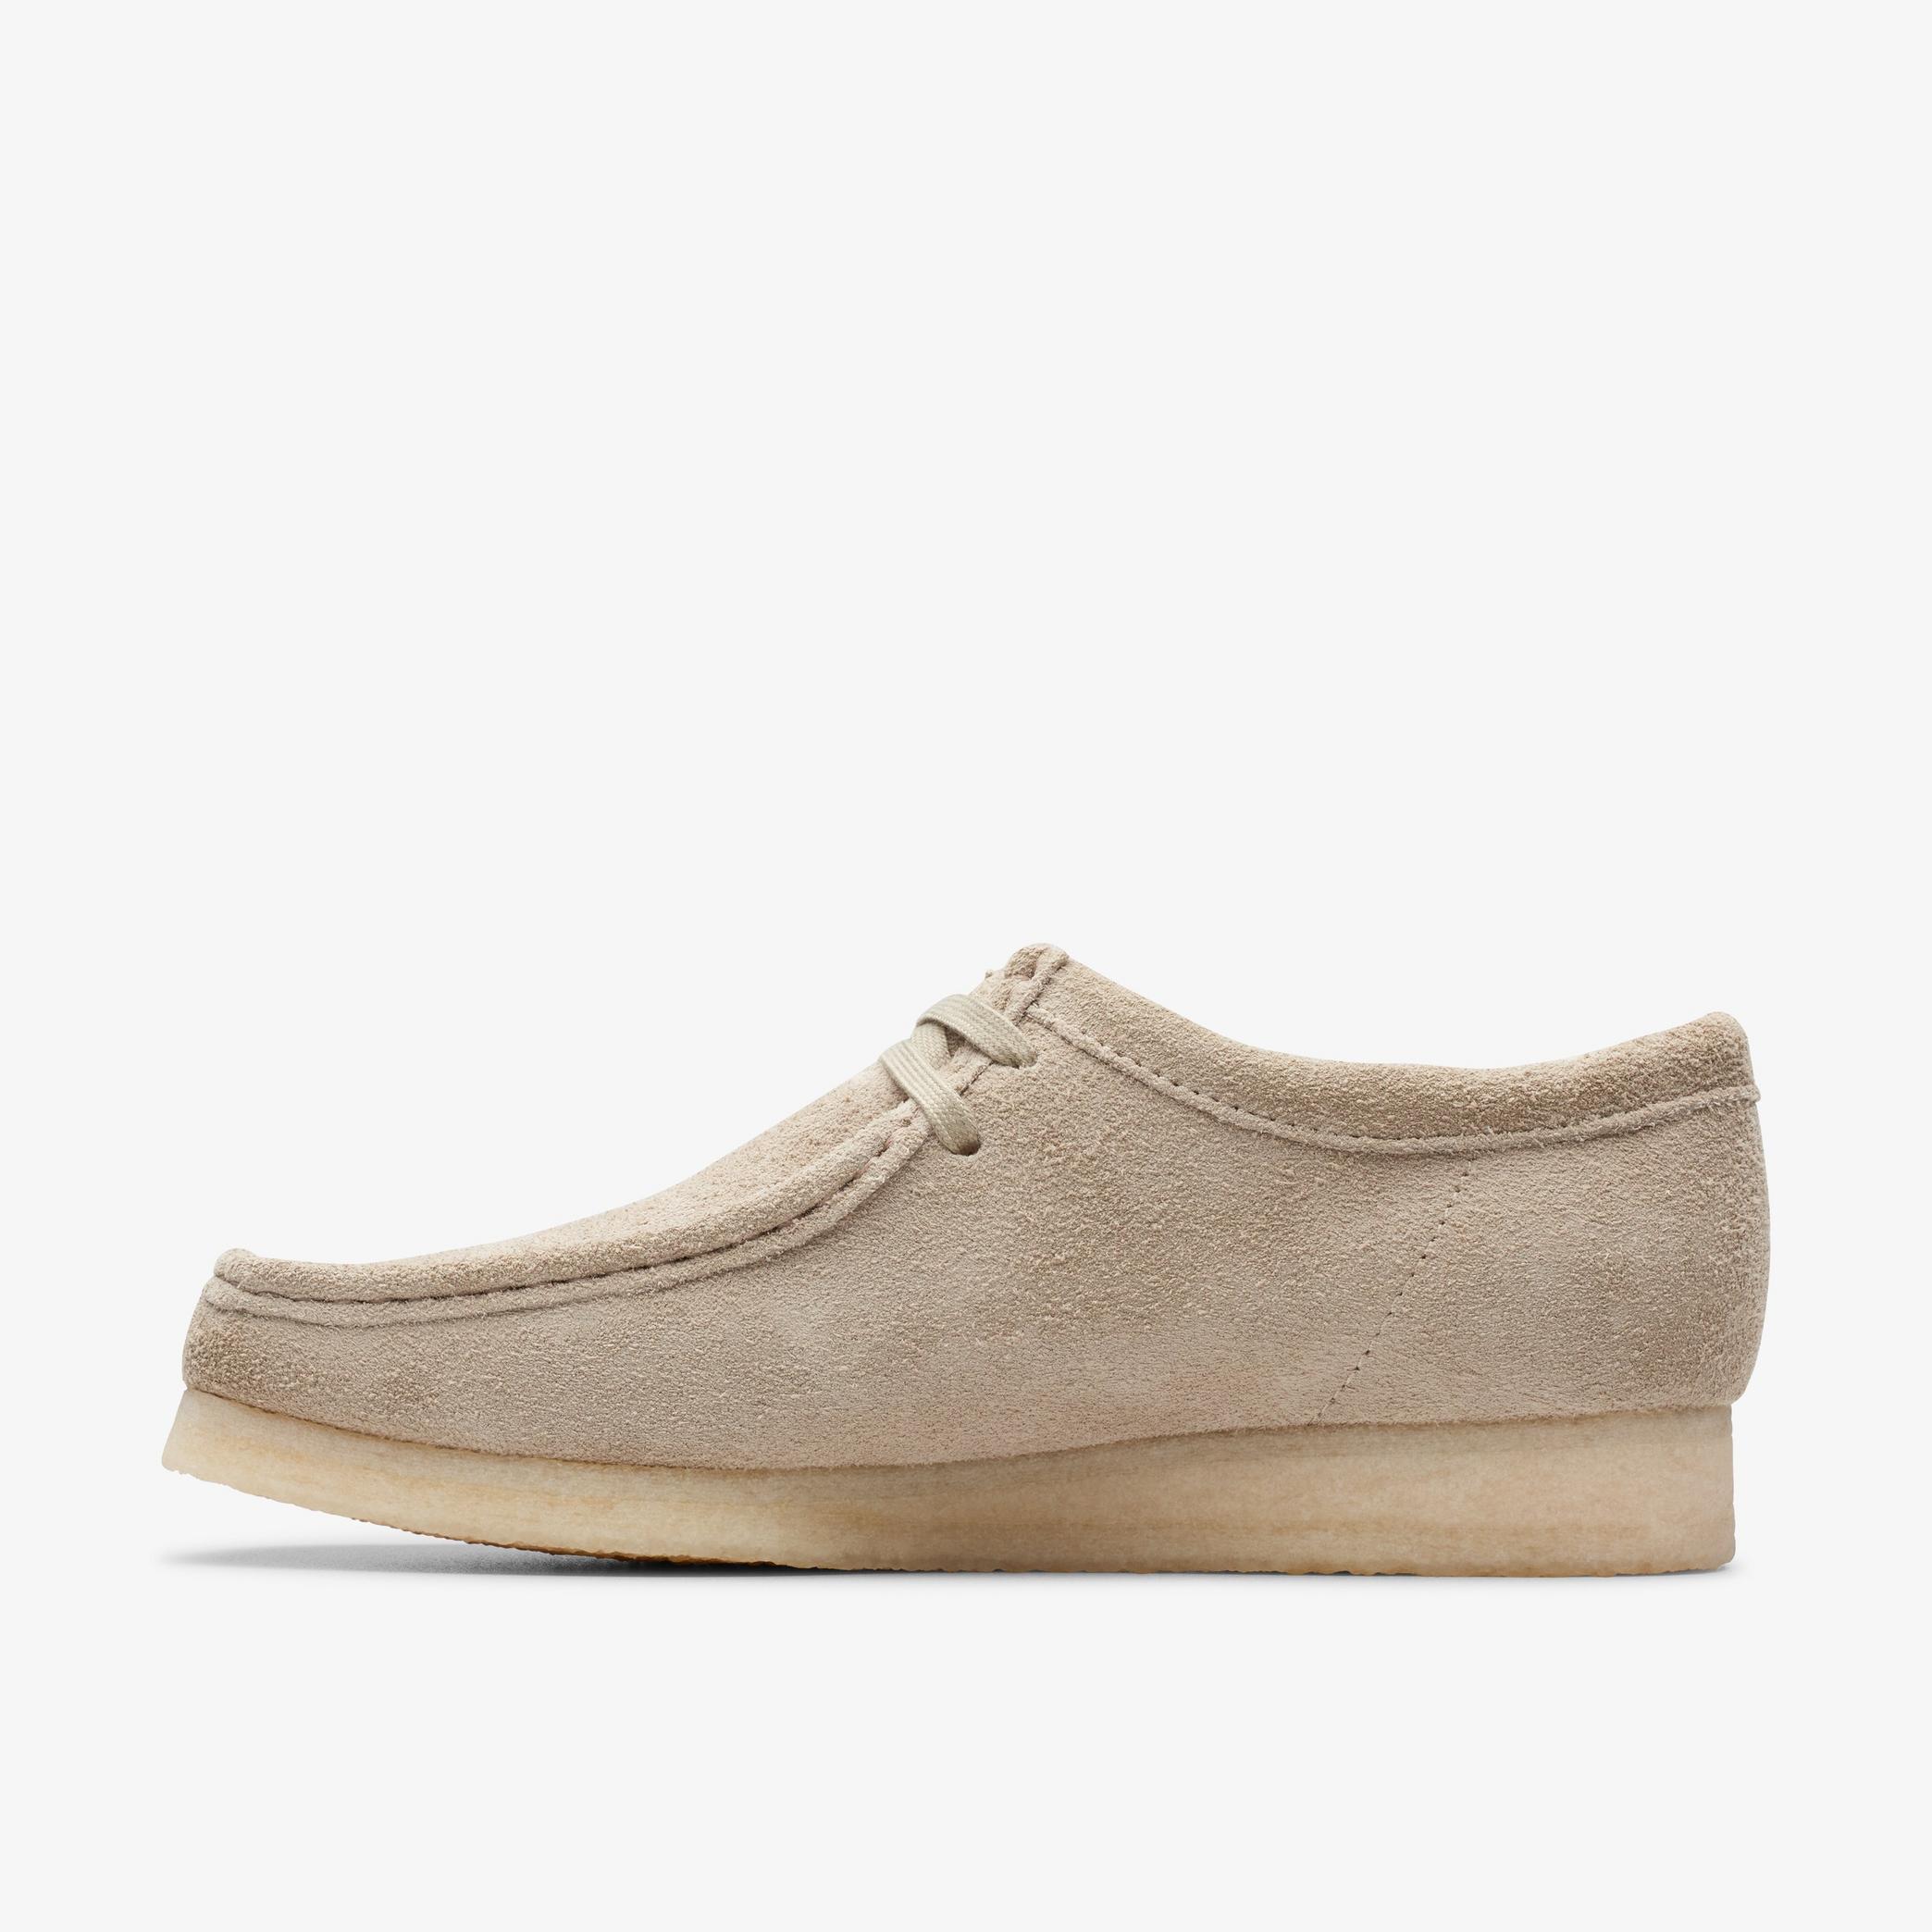 Wallabee Pale Grey Suede Wallabee, view 2 of 7